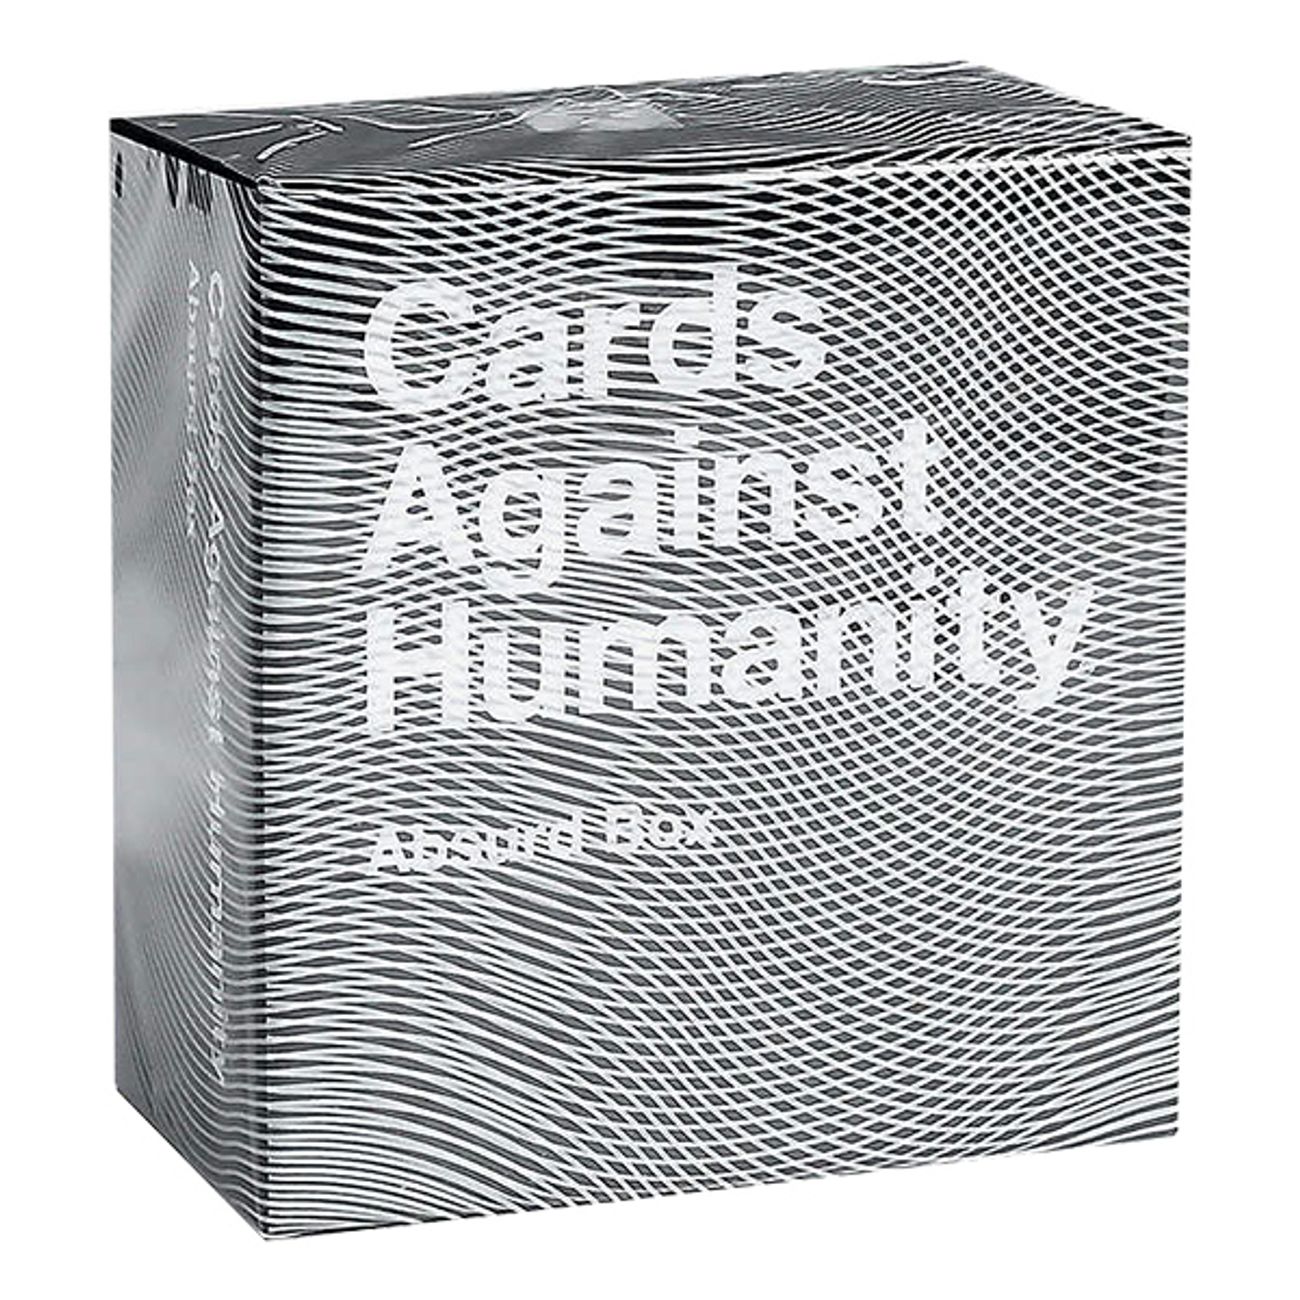 cards-against-humanity-25